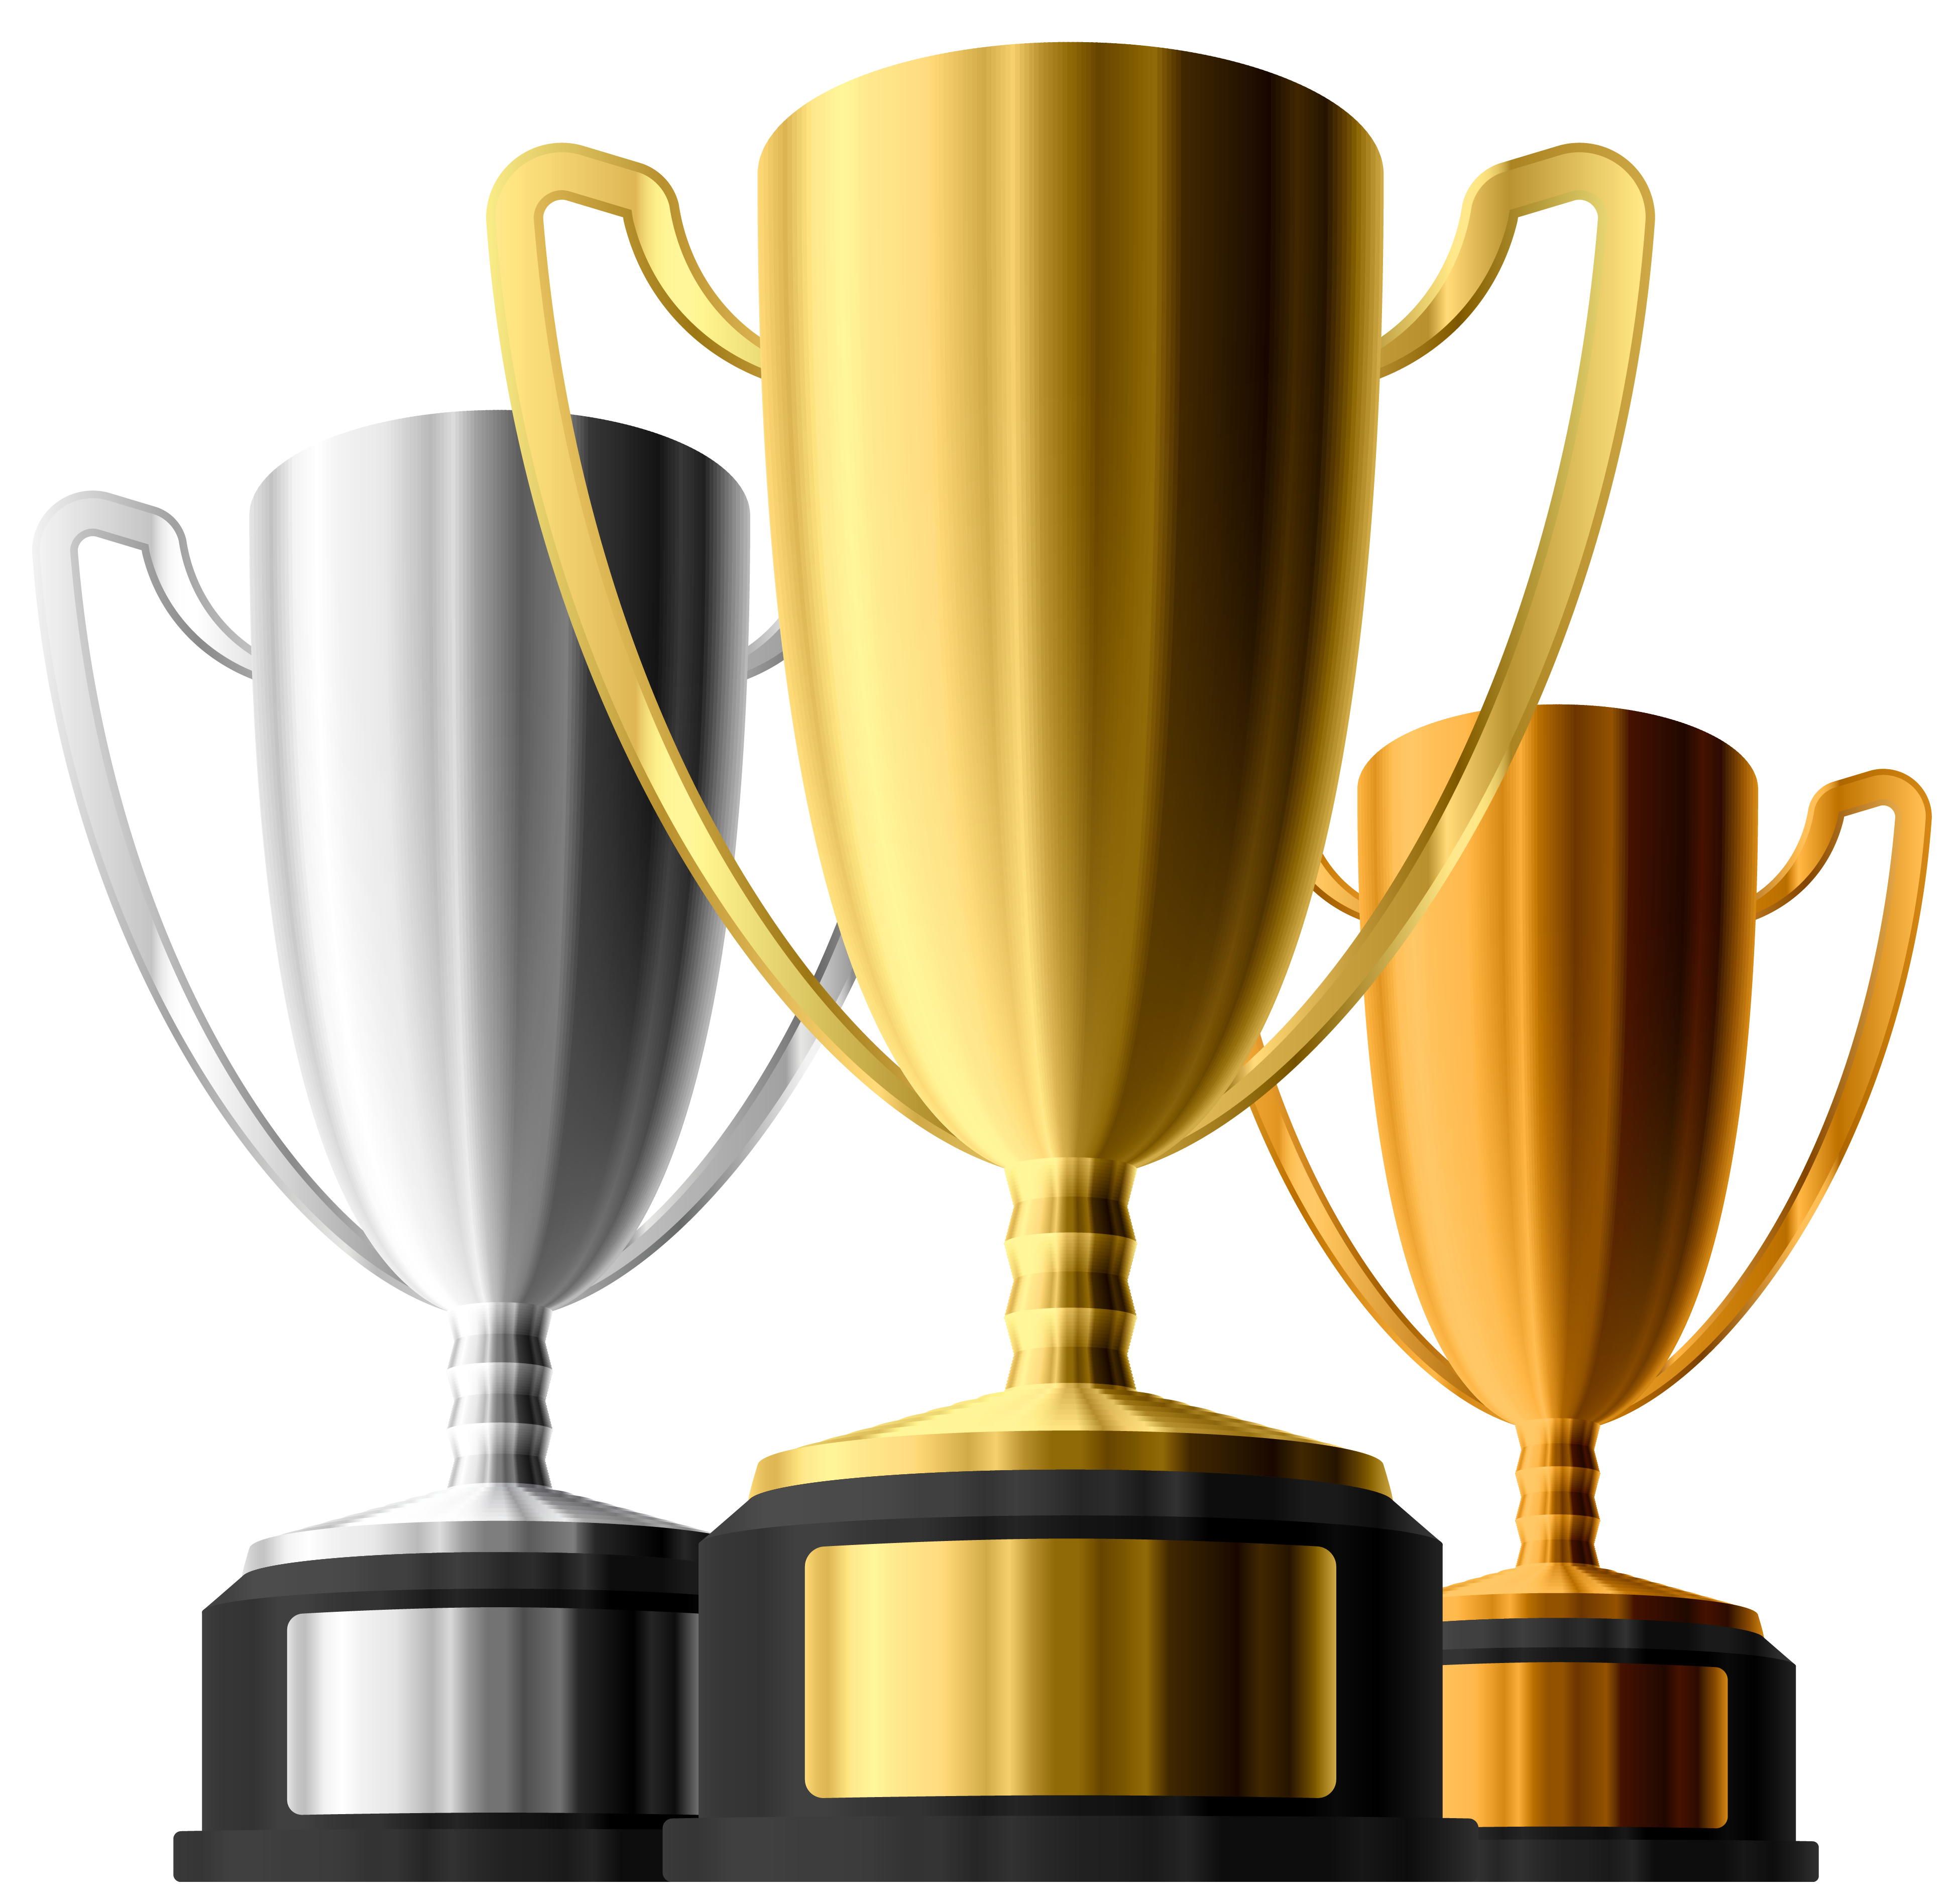 Gold_Silver_Bronze_Trophies_Clipart.png?m=1432204033 